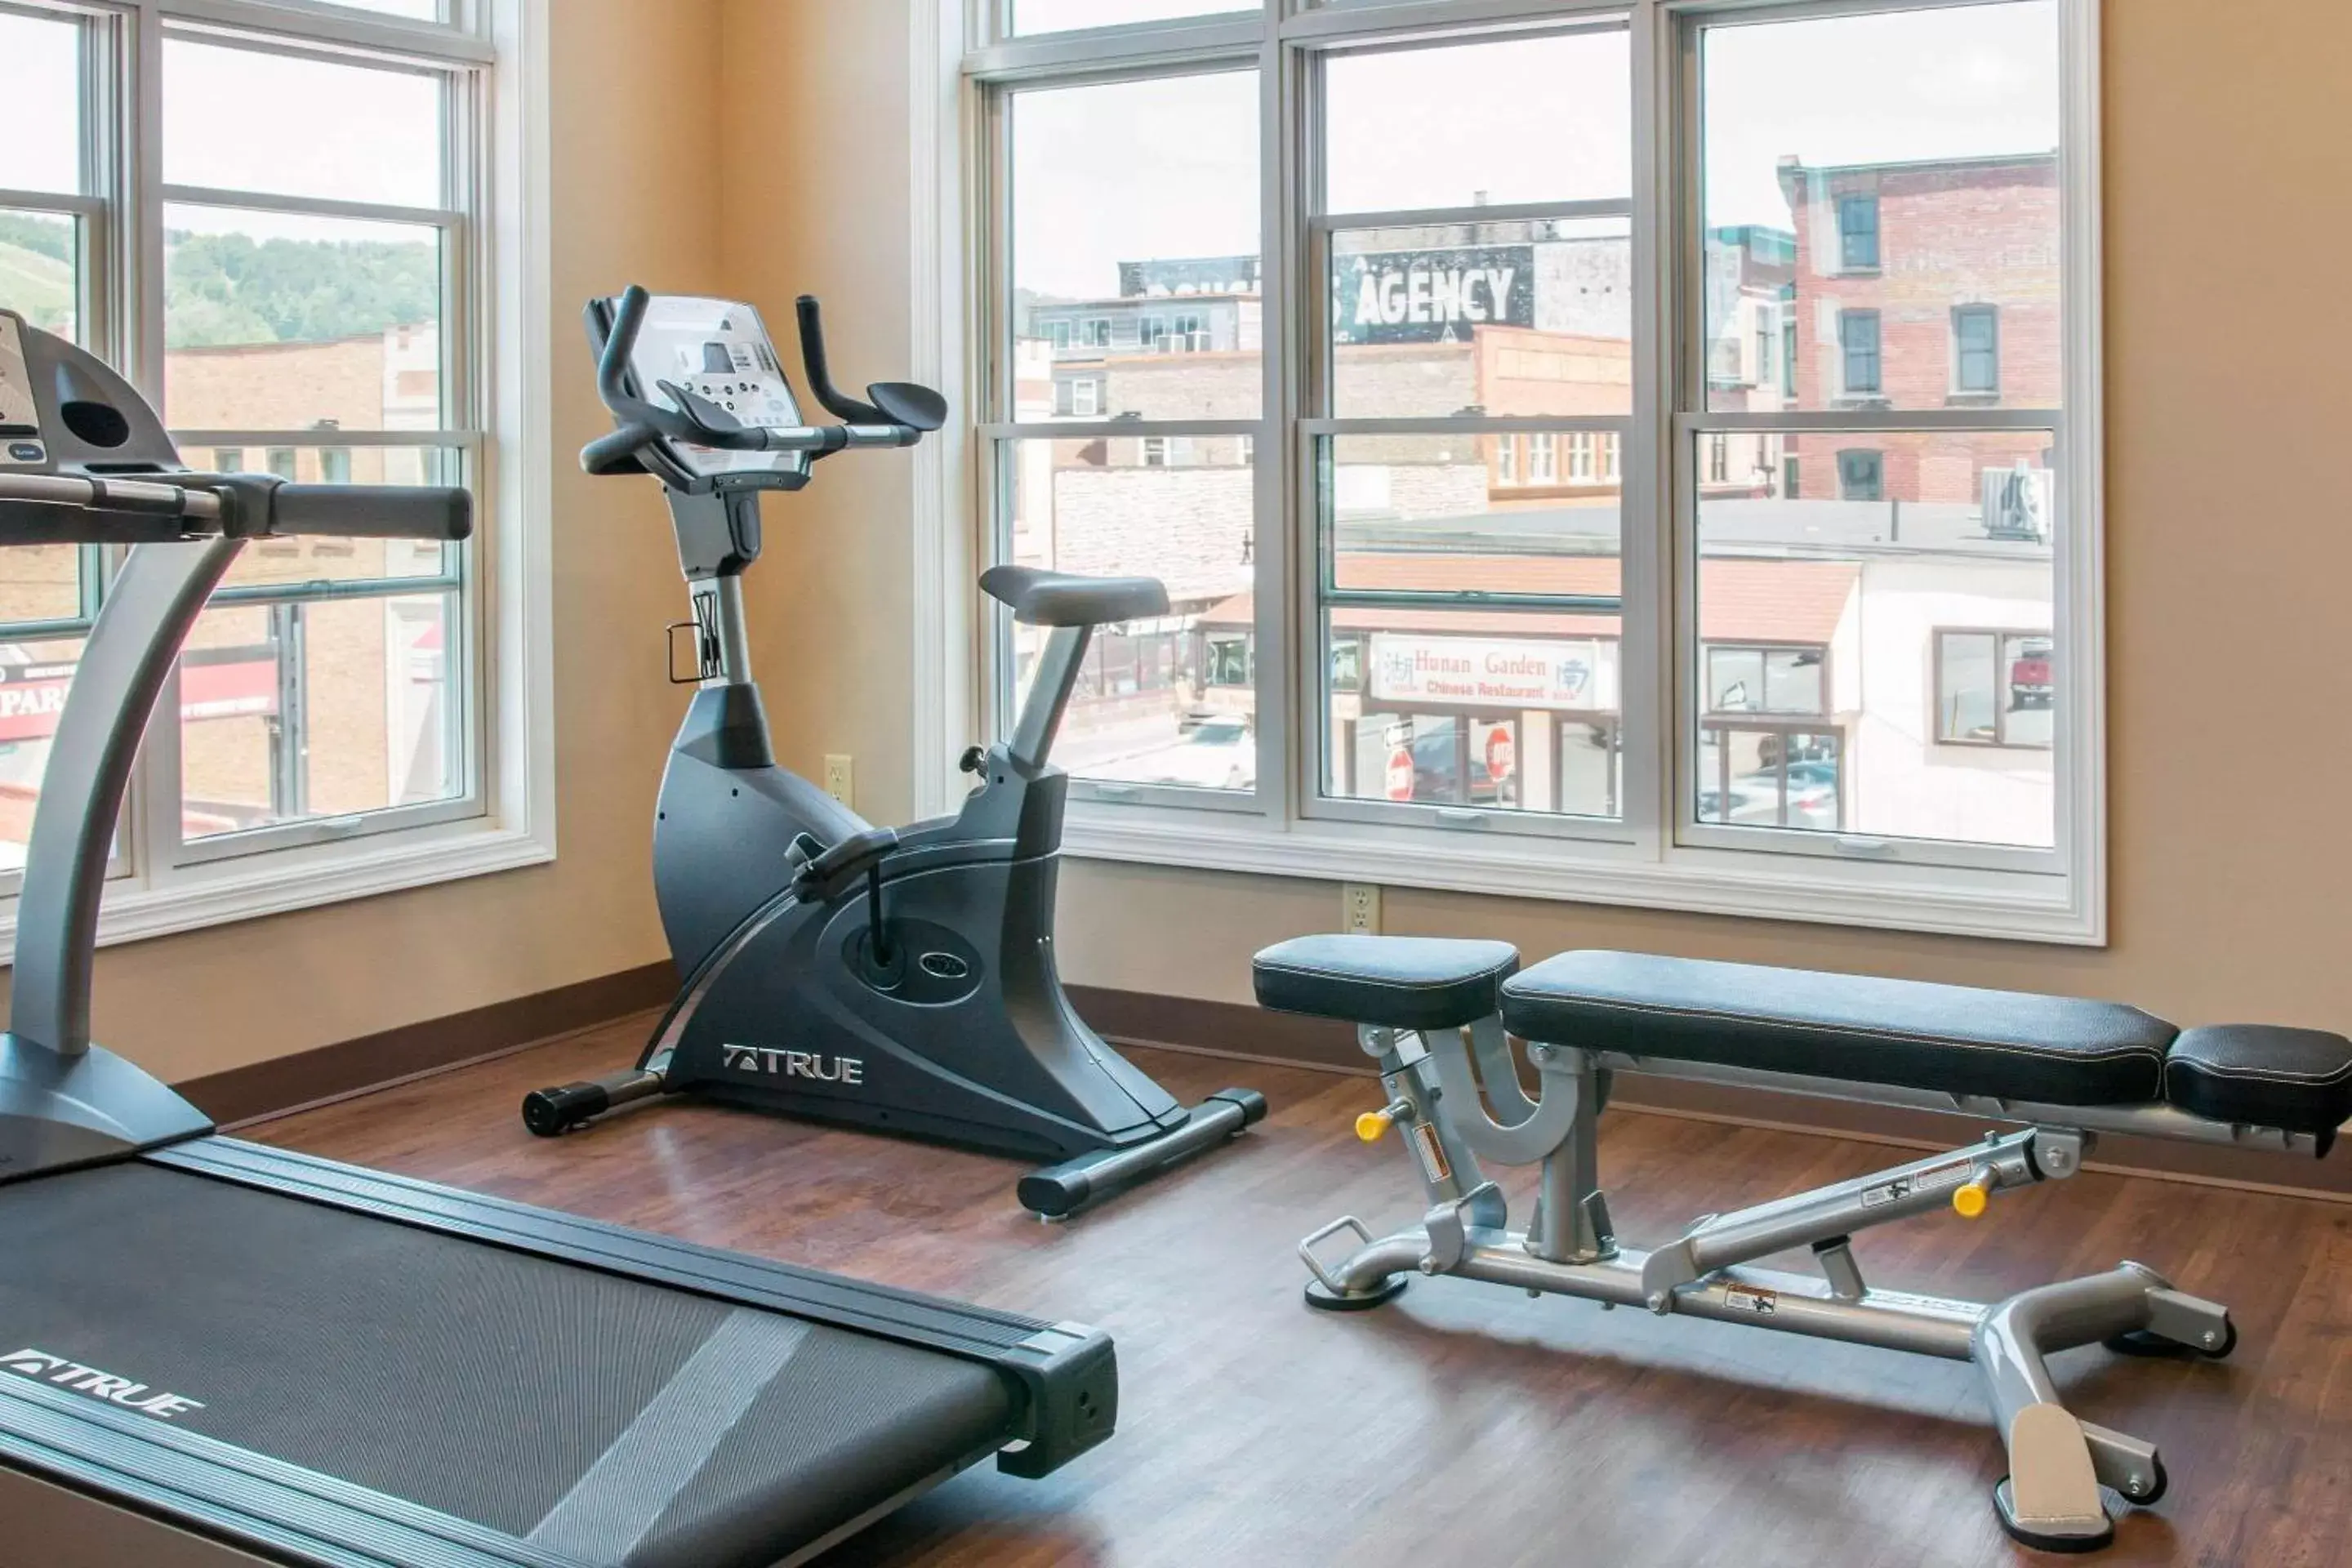 Fitness centre/facilities, Fitness Center/Facilities in Quality Inn & Suites Houghton